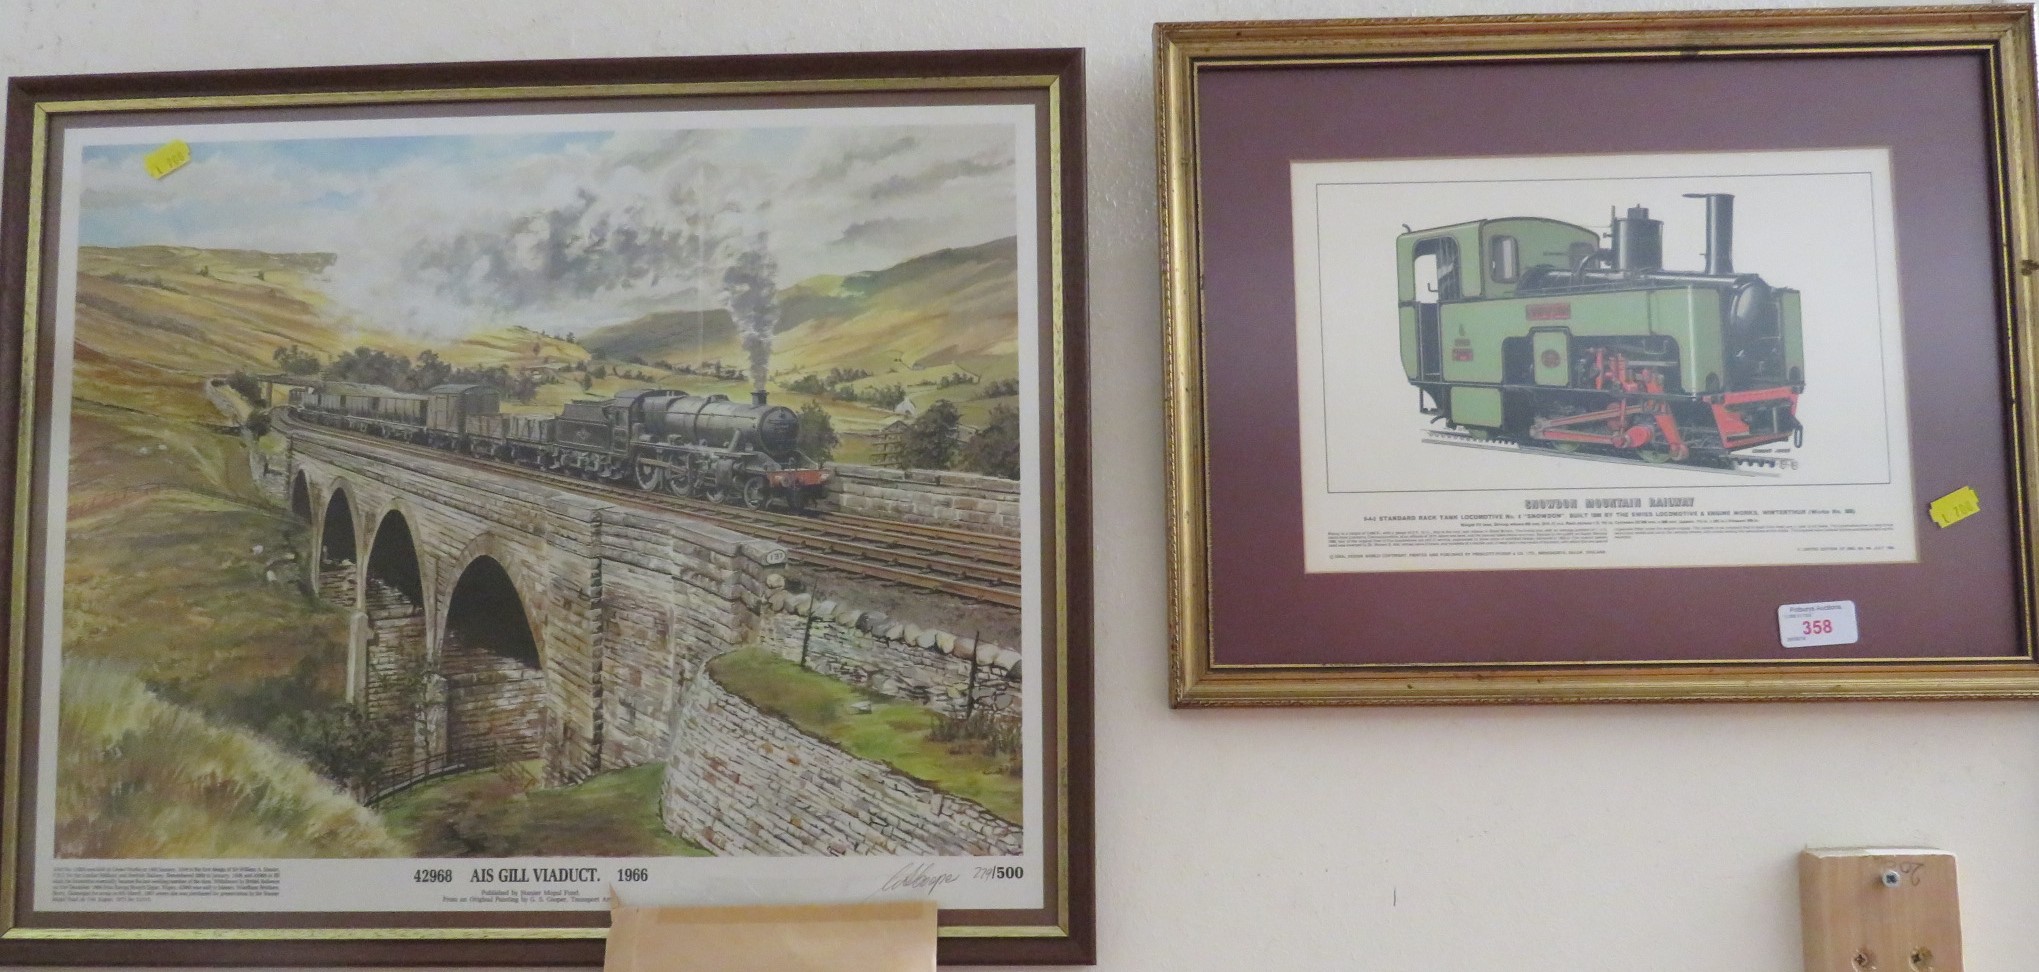 FRAMED AND MOUNTED PICTURE OF LOCOMOTIVE 'SNOWDON MOUNTAIN RAILWAY', TOGETHER WITH LIMITED EDITION